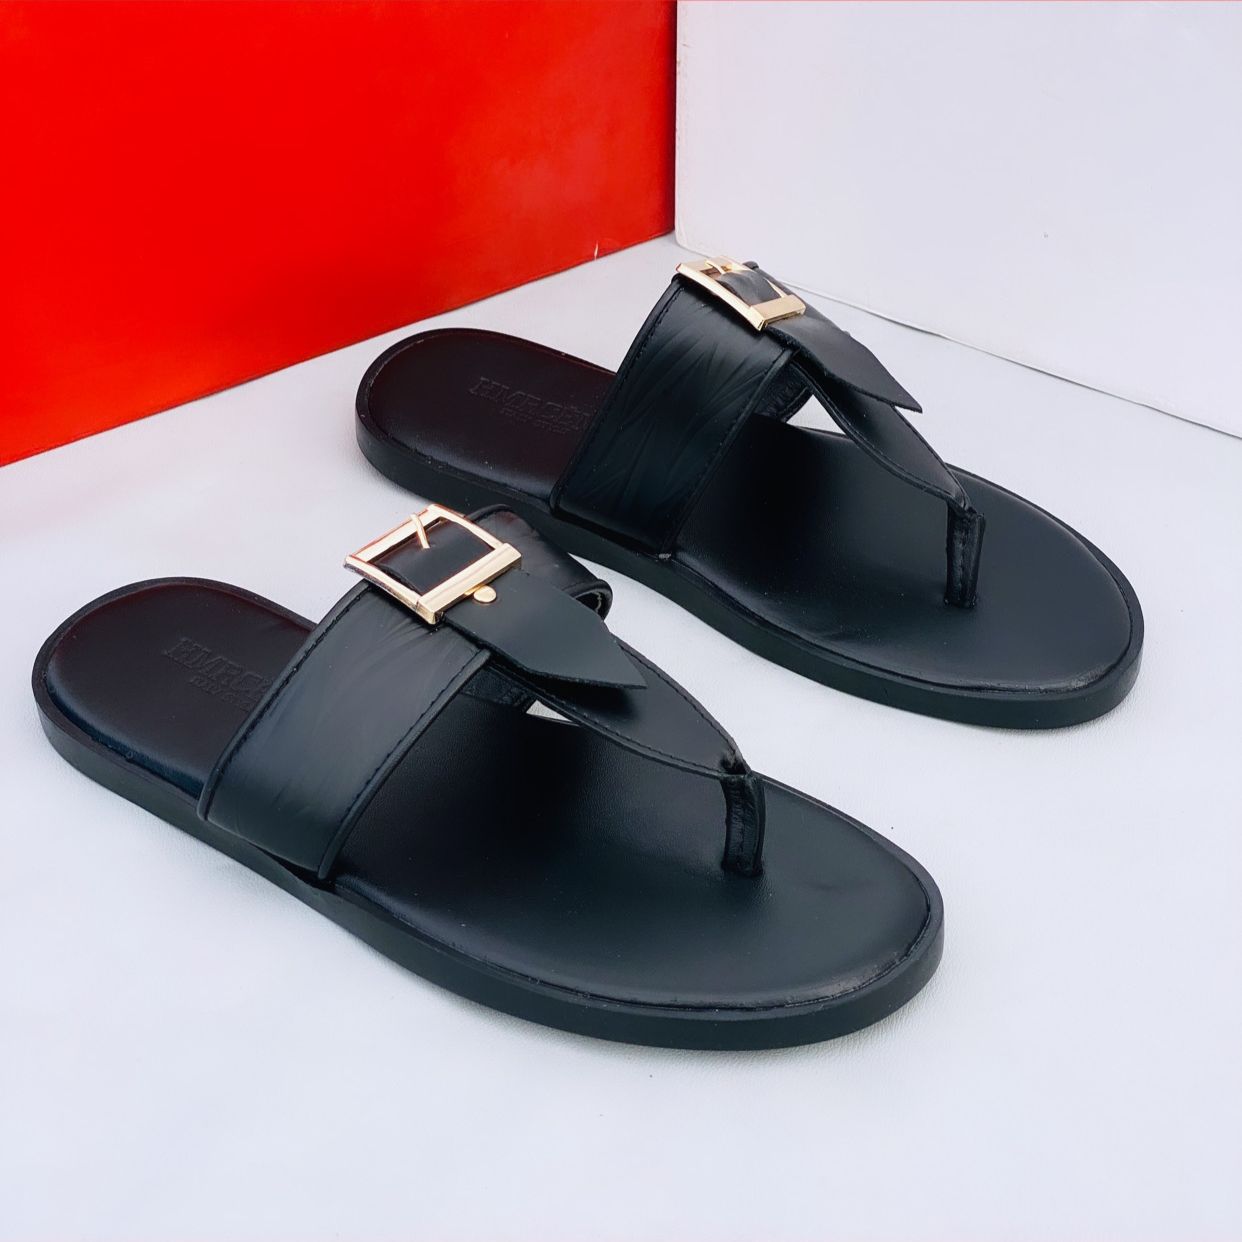 Black Slippers With Belt Buckle | Buy Online At The Best Price In Accra